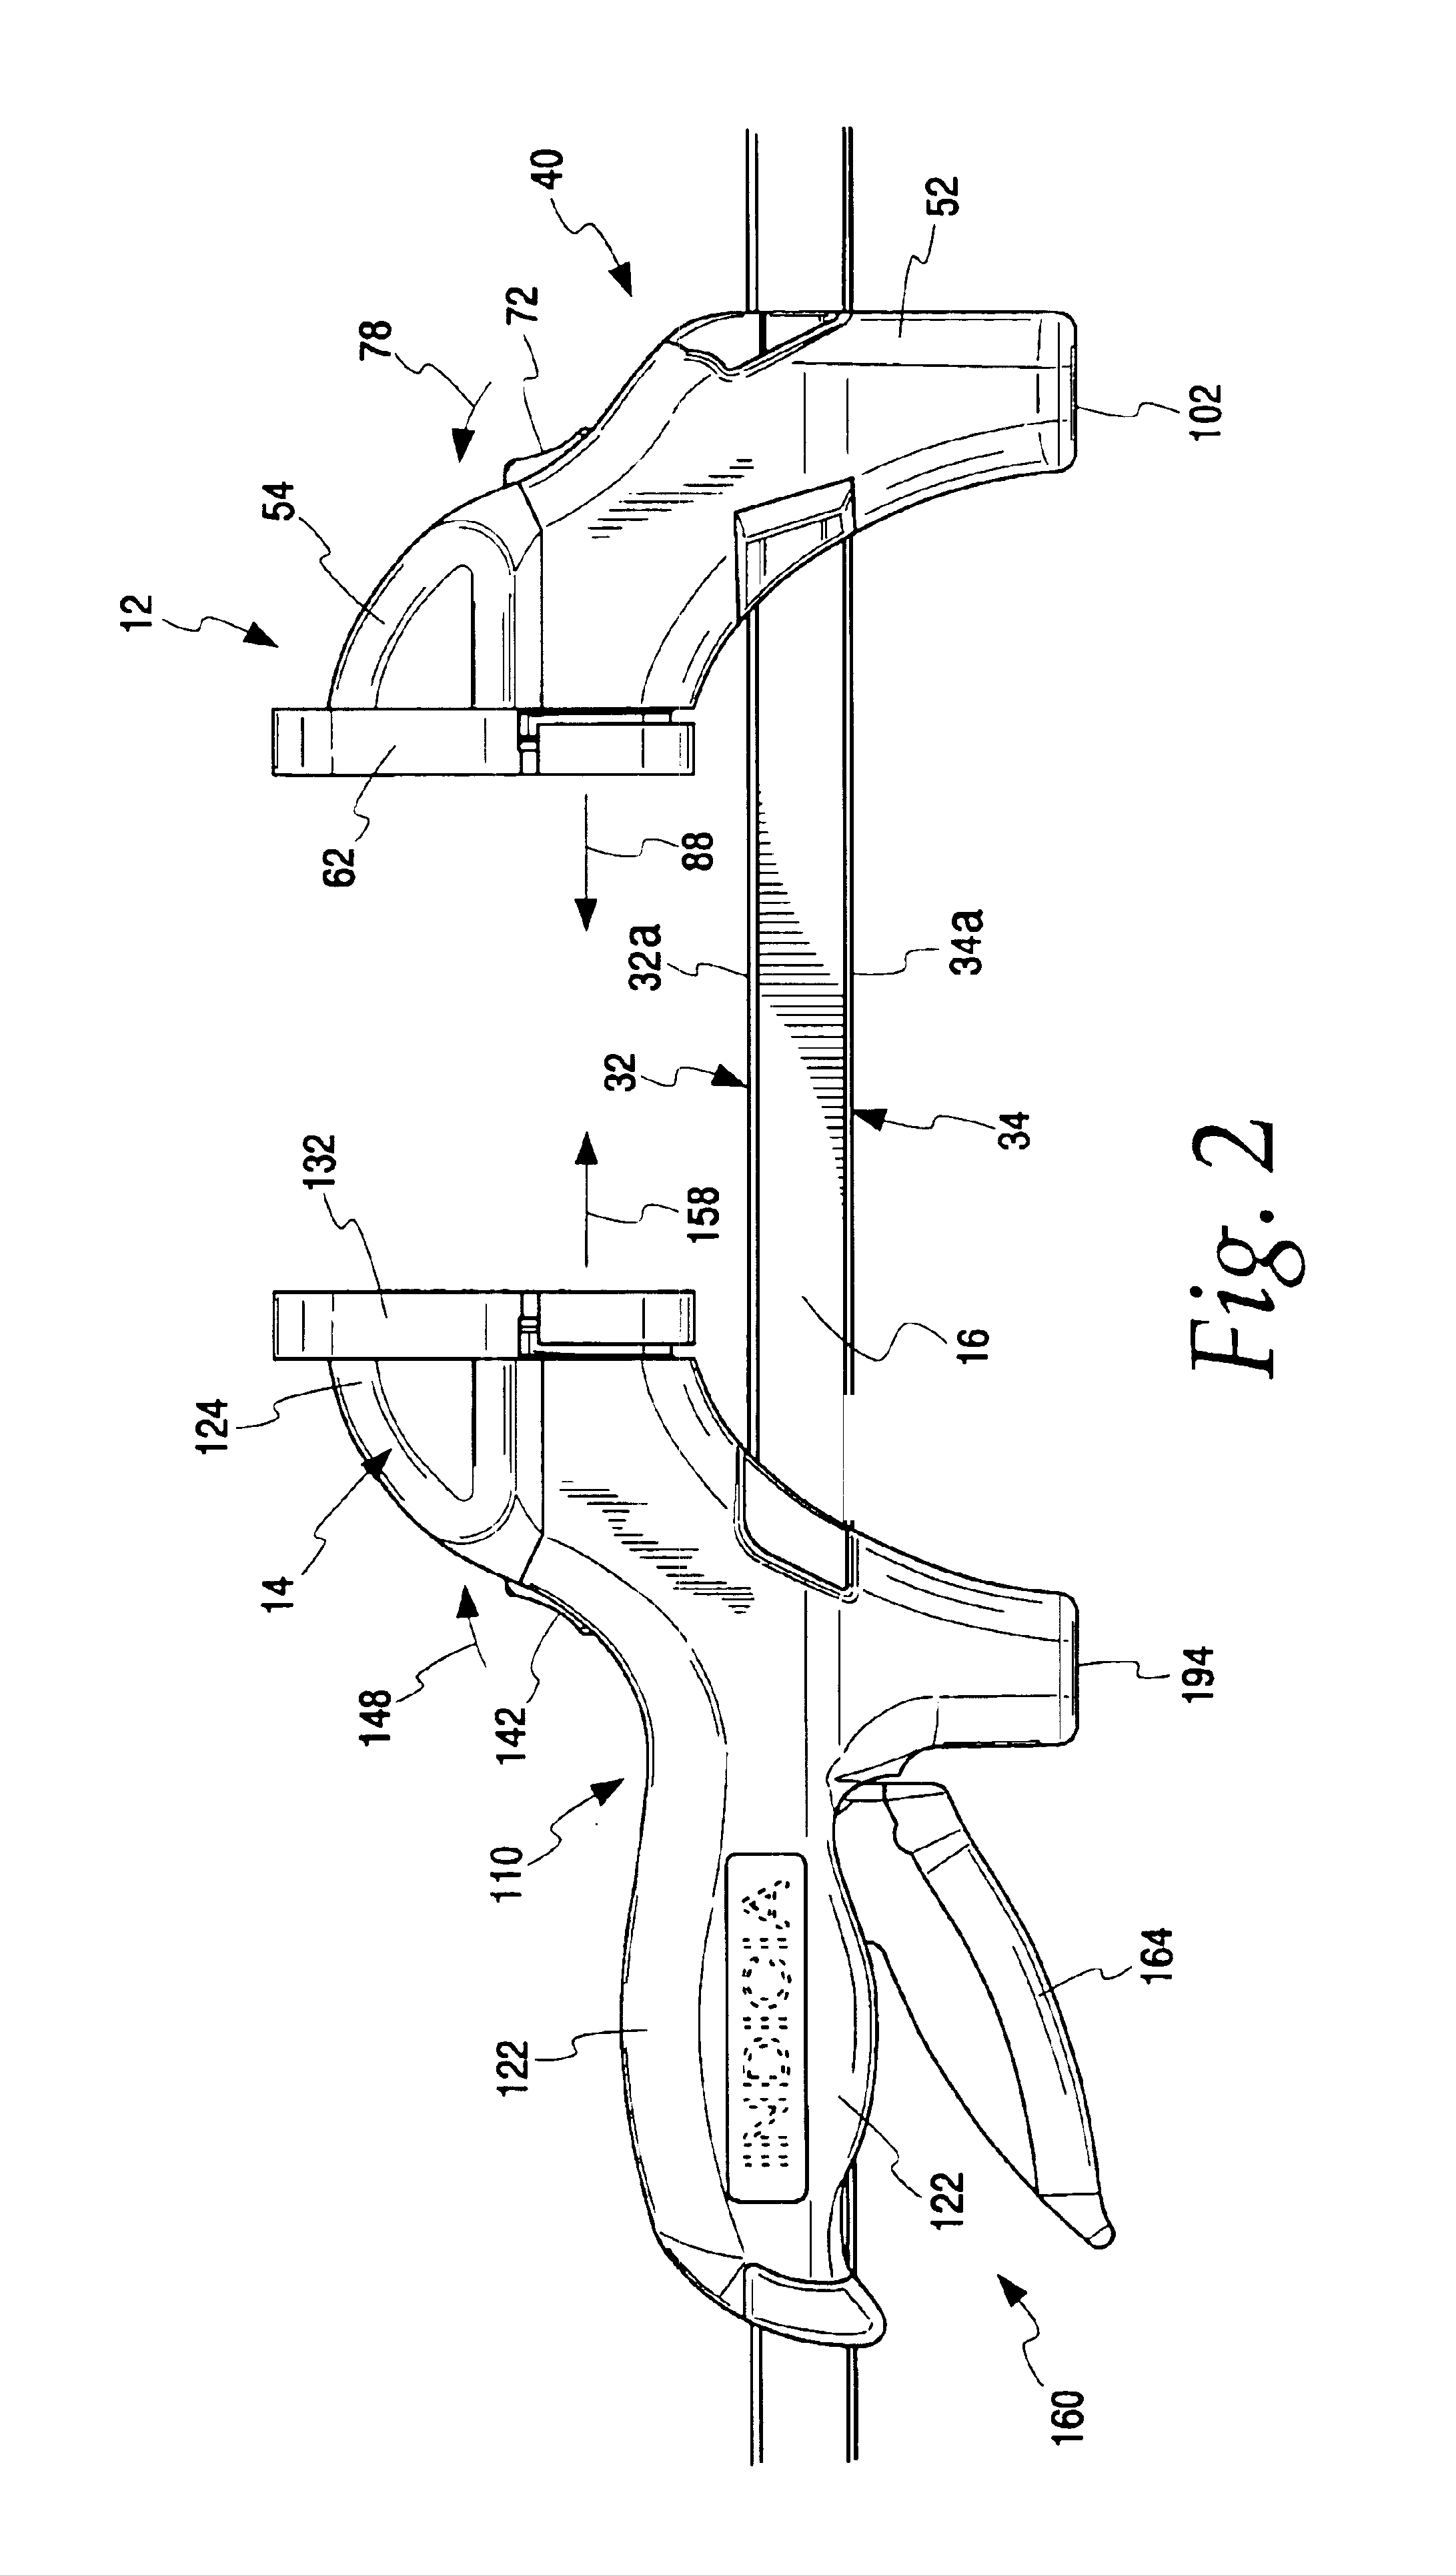 Apparatus for securing a workpiece